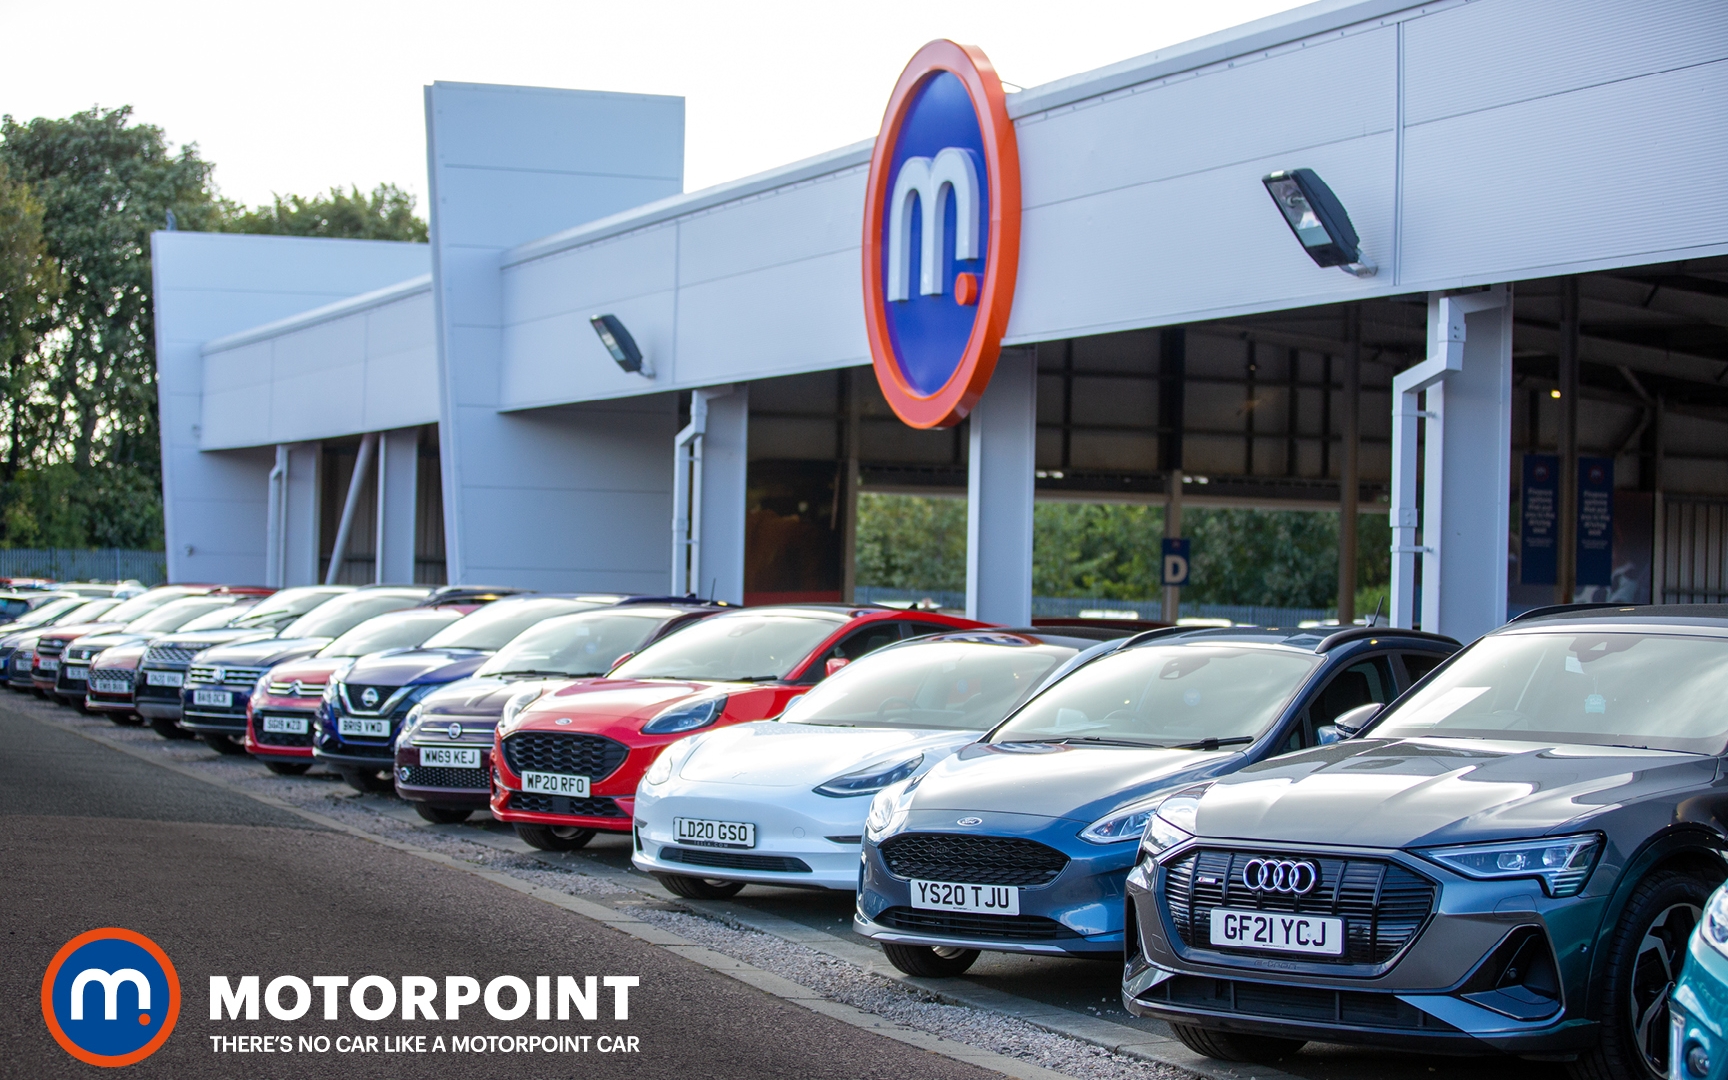 WIN! A car of your choice worth up to £25,000 thanks to Motorpoint! – talkSPORT